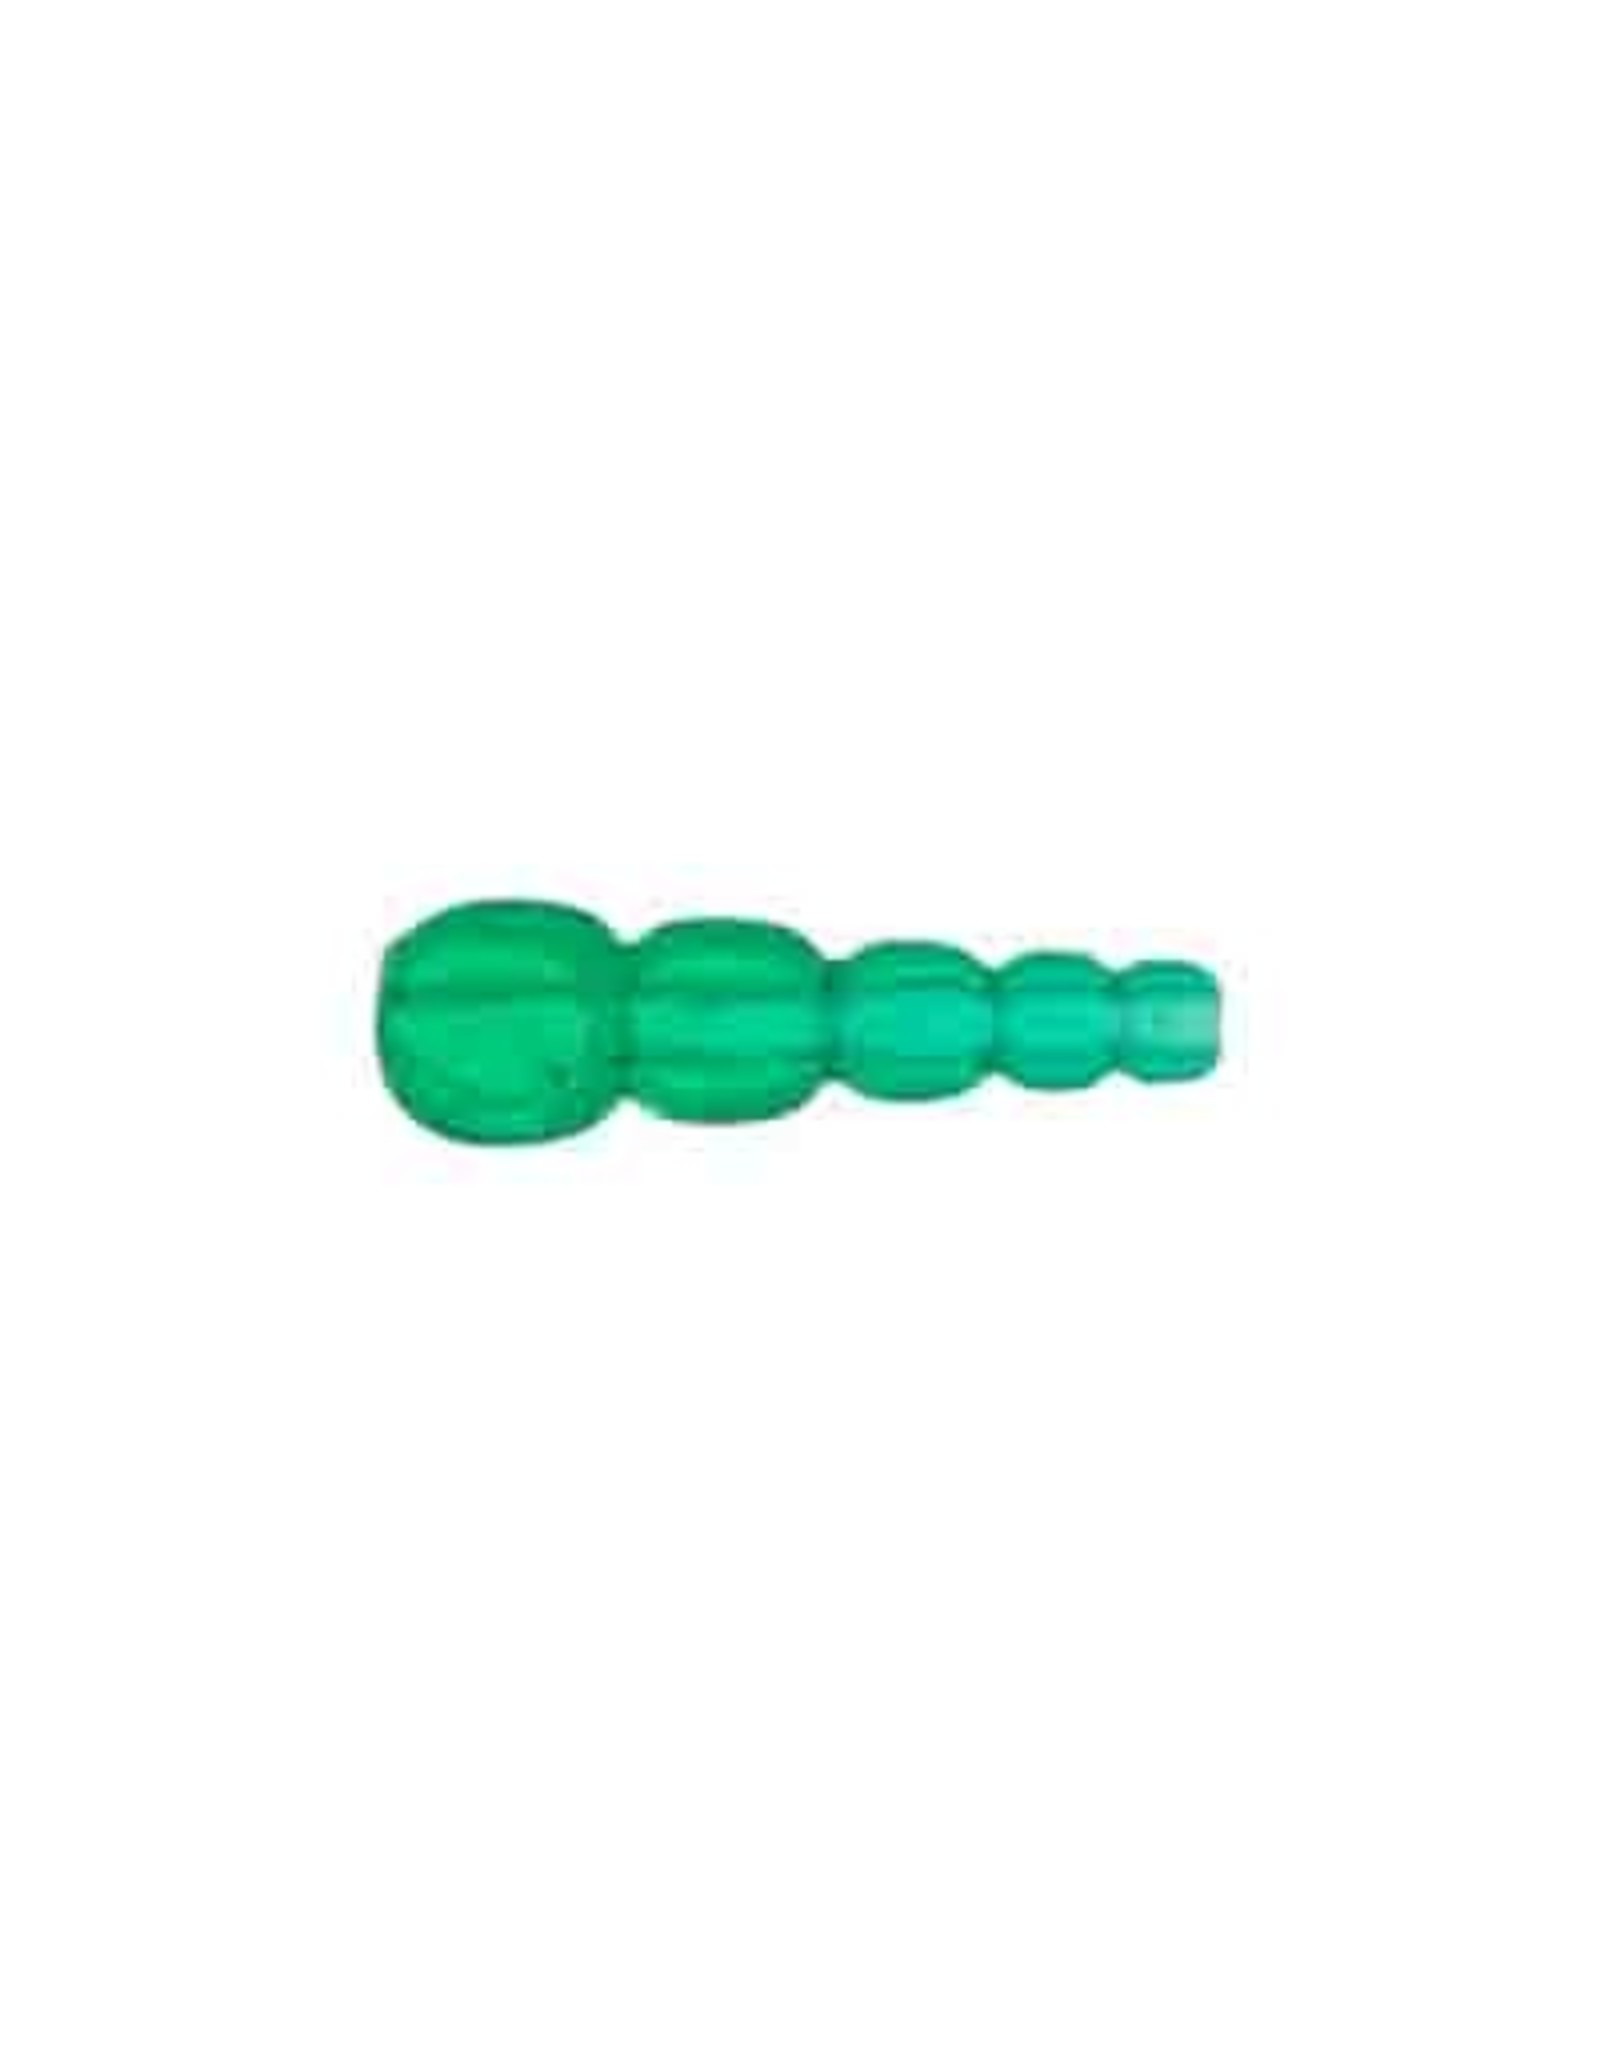 Stacking  20mm Long  approx 6-2mm  Transparent Dark Green  x25